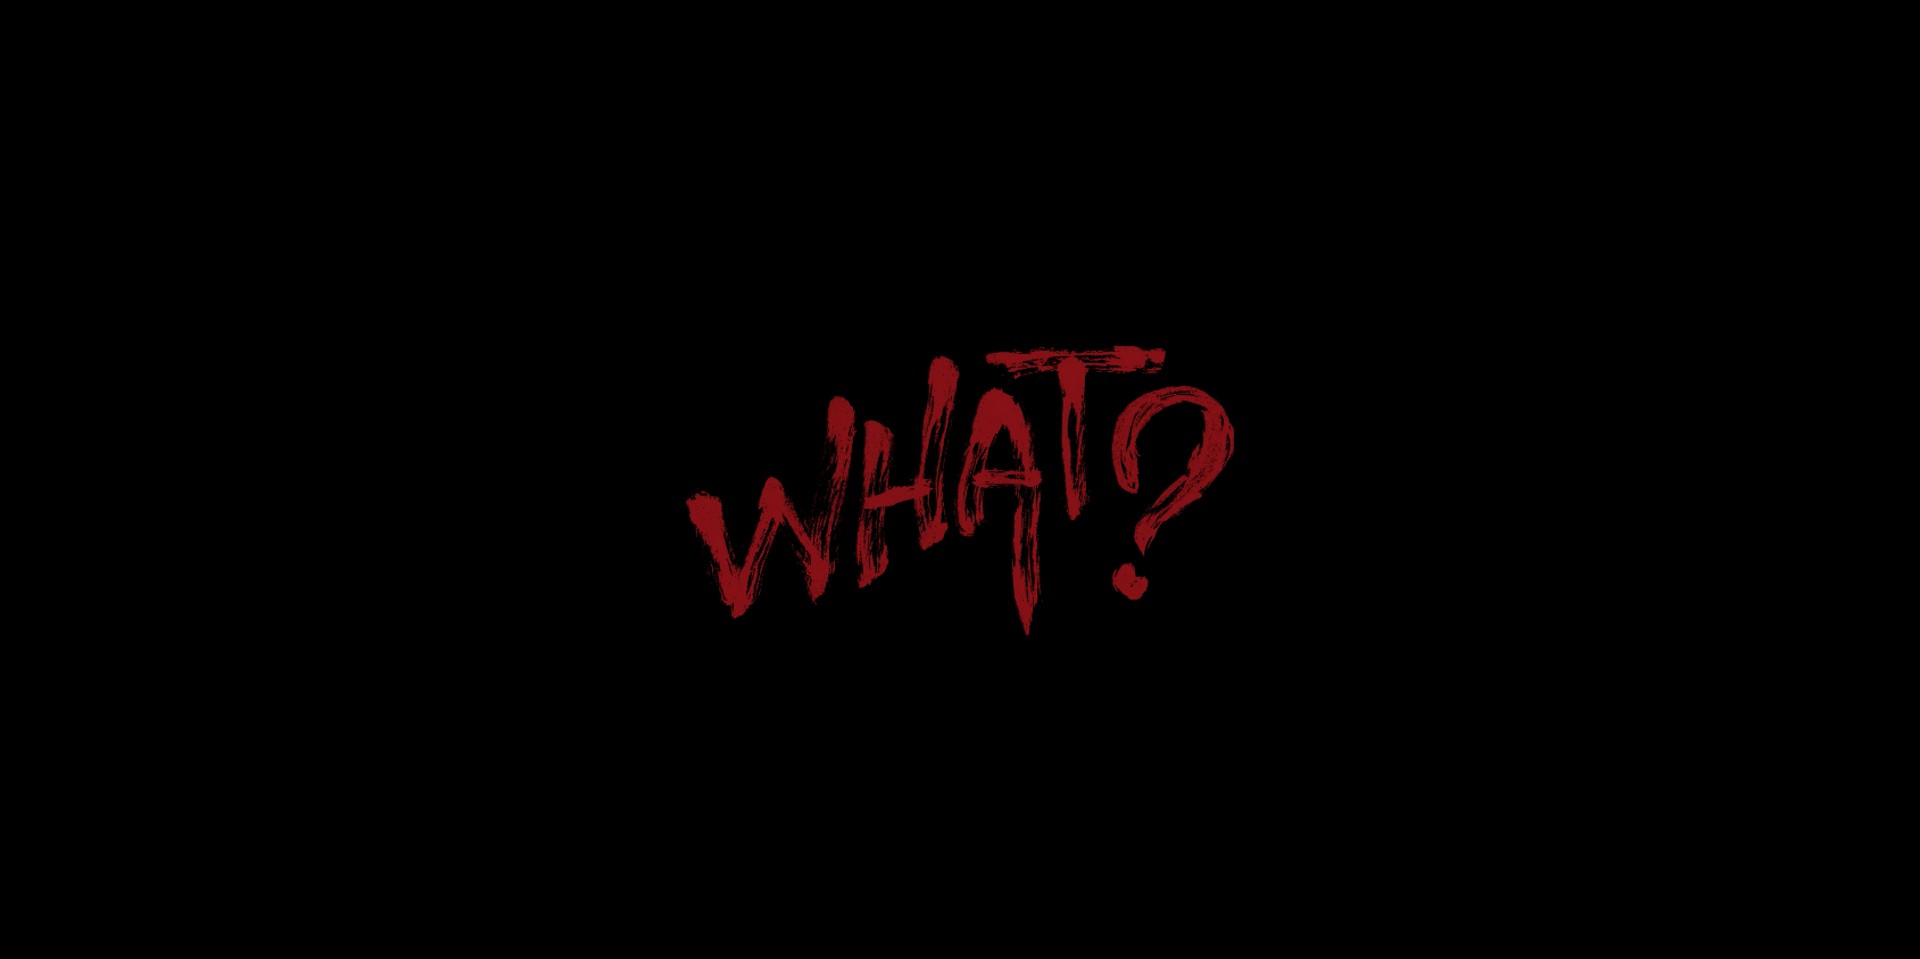 SB19 tease new single with 'WHAT?' Mood Film – watch